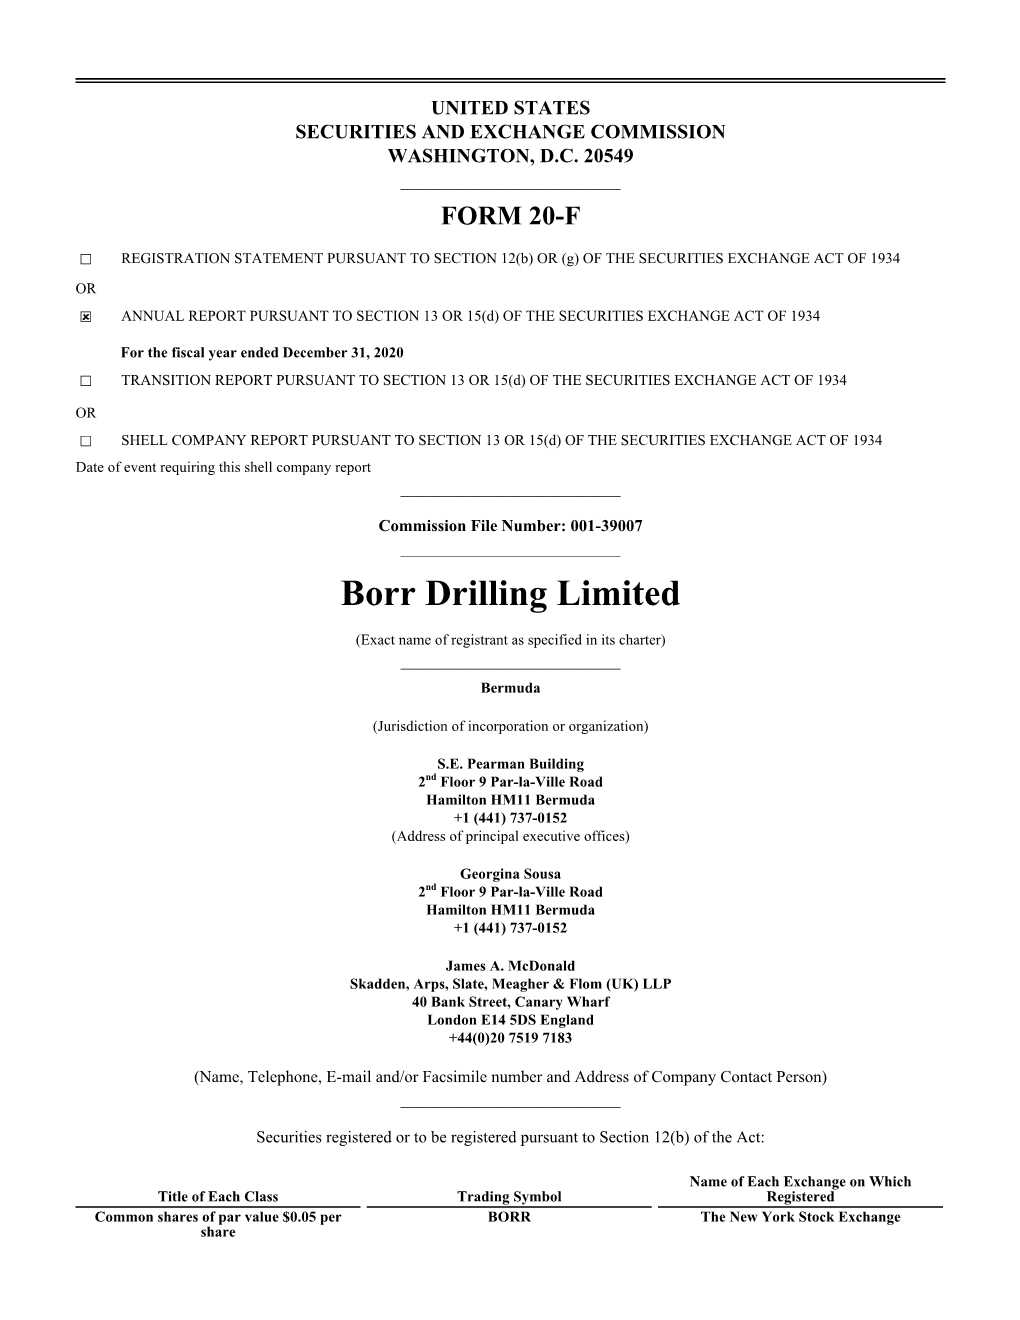 Borr Drilling Limited Files Its 2020 Annual Report on Form 20-F And